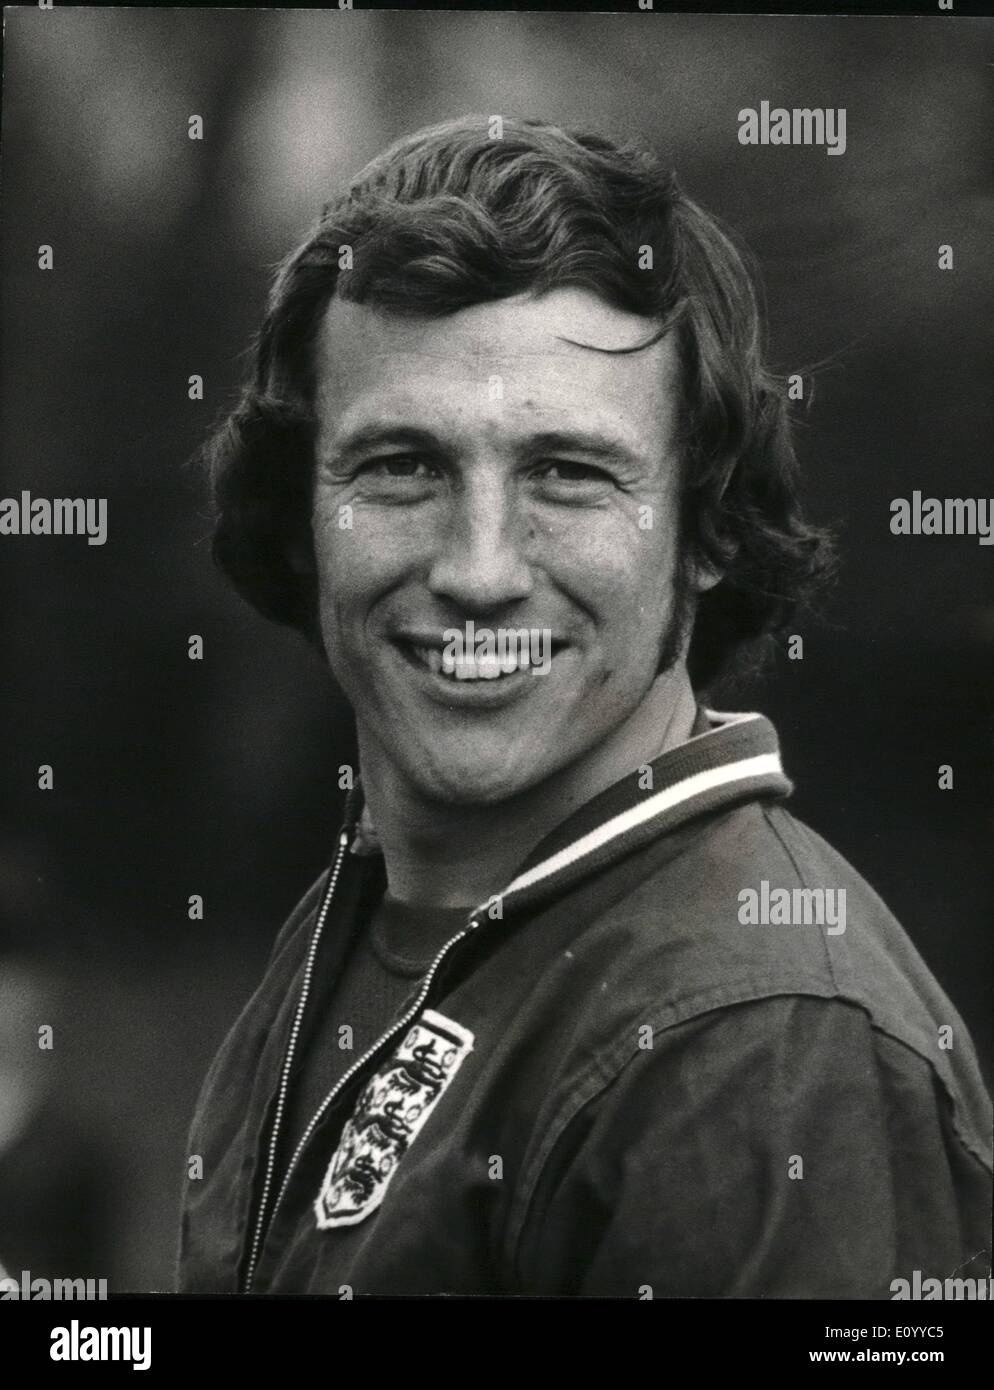 Nov. 11, 1971 - International Footballer and Arsenal star Bob McNba named in Divorce Petition: Bob McNab aged 27, the England and full - back has named in a divorce petition by Douglas Harrison, a Senior Executive of Management Agency and Music, a ?15 million empire controlling; Tom Jones and Engelbert Humperdinck. He allege that McNab committed adultery with his 30 year old wife, Marion, from whom he parted some four months age Stock Photo